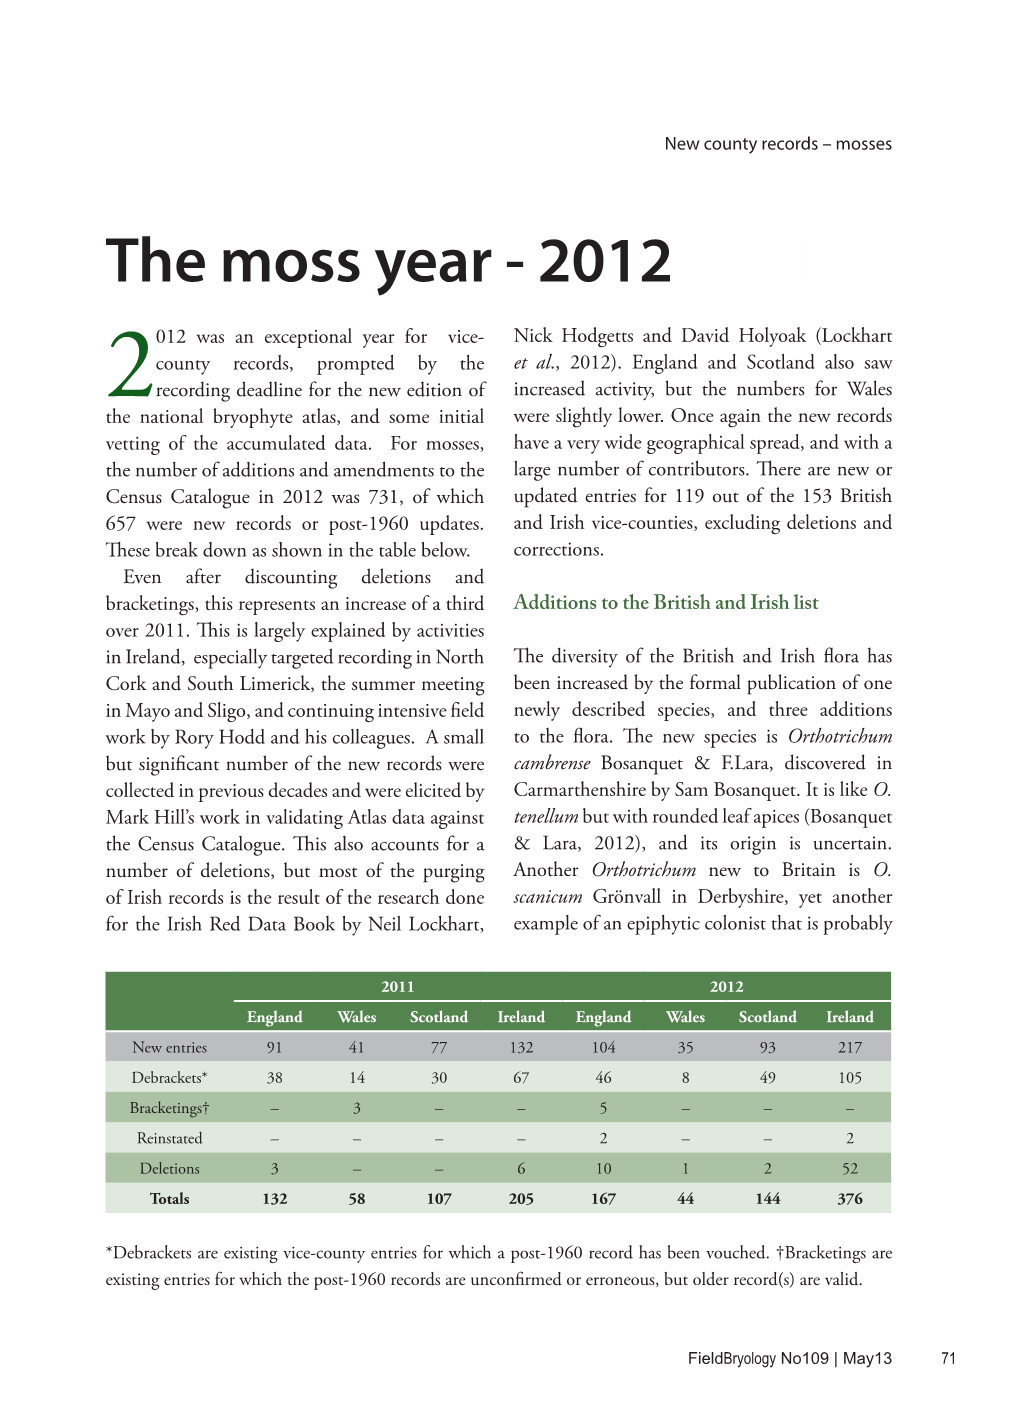 The Moss Year - 2012– 2012